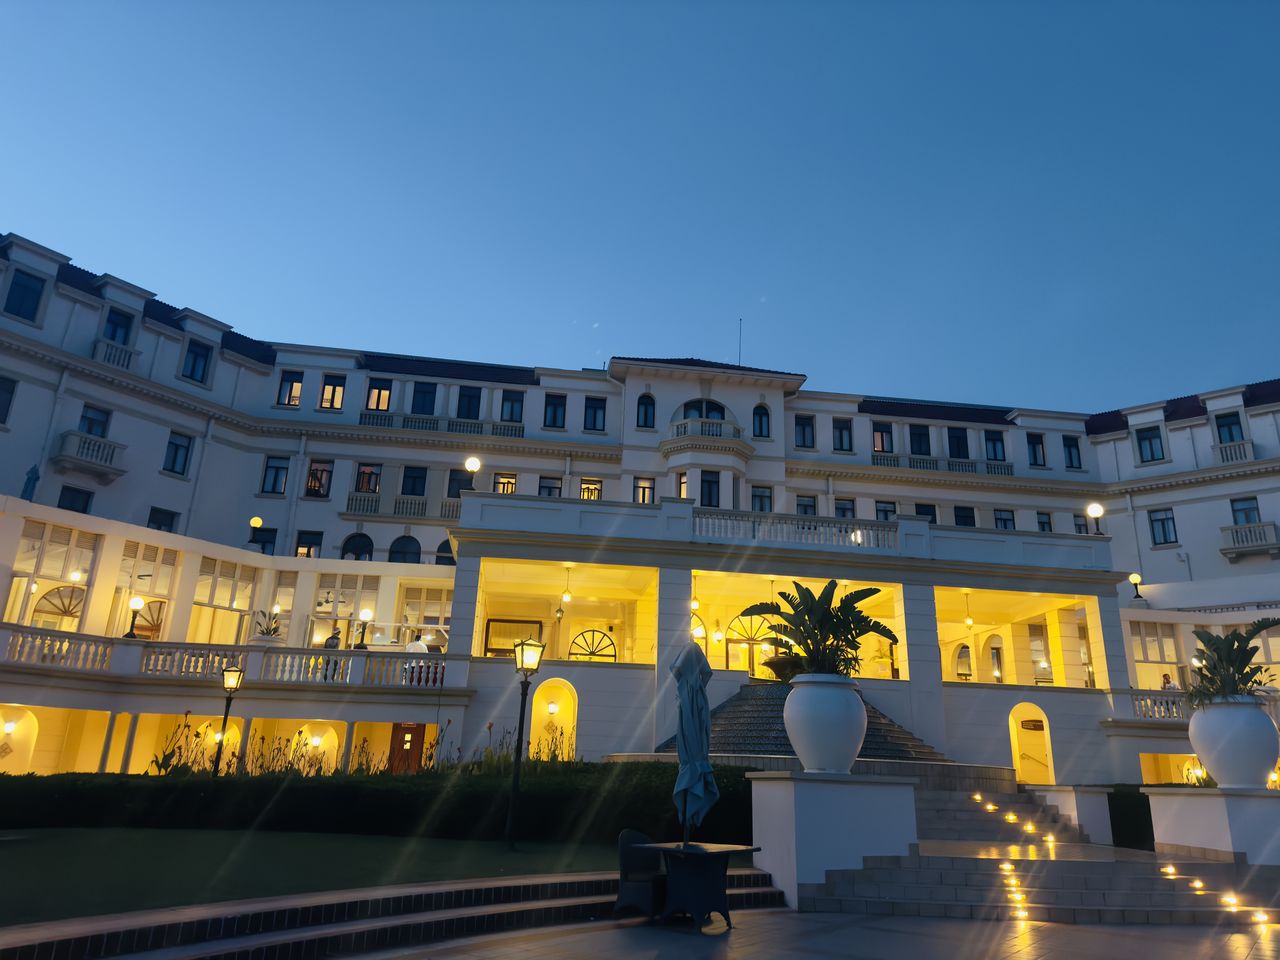 Beautiful Polana Serena Hotel - Maputo, Moçambique 🇲🇿 Maputo Mozambique Moçambique Travel Destinations Hotel Luxury Hotel Travel Photography Travelling Polana Tourist Attraction  Content Hotel View Hotels Africa Portugese Evening Sky Evening Light Nightphotography Night Photography AspiringPhotographer Wanderlust Globetrotter 🎈👻